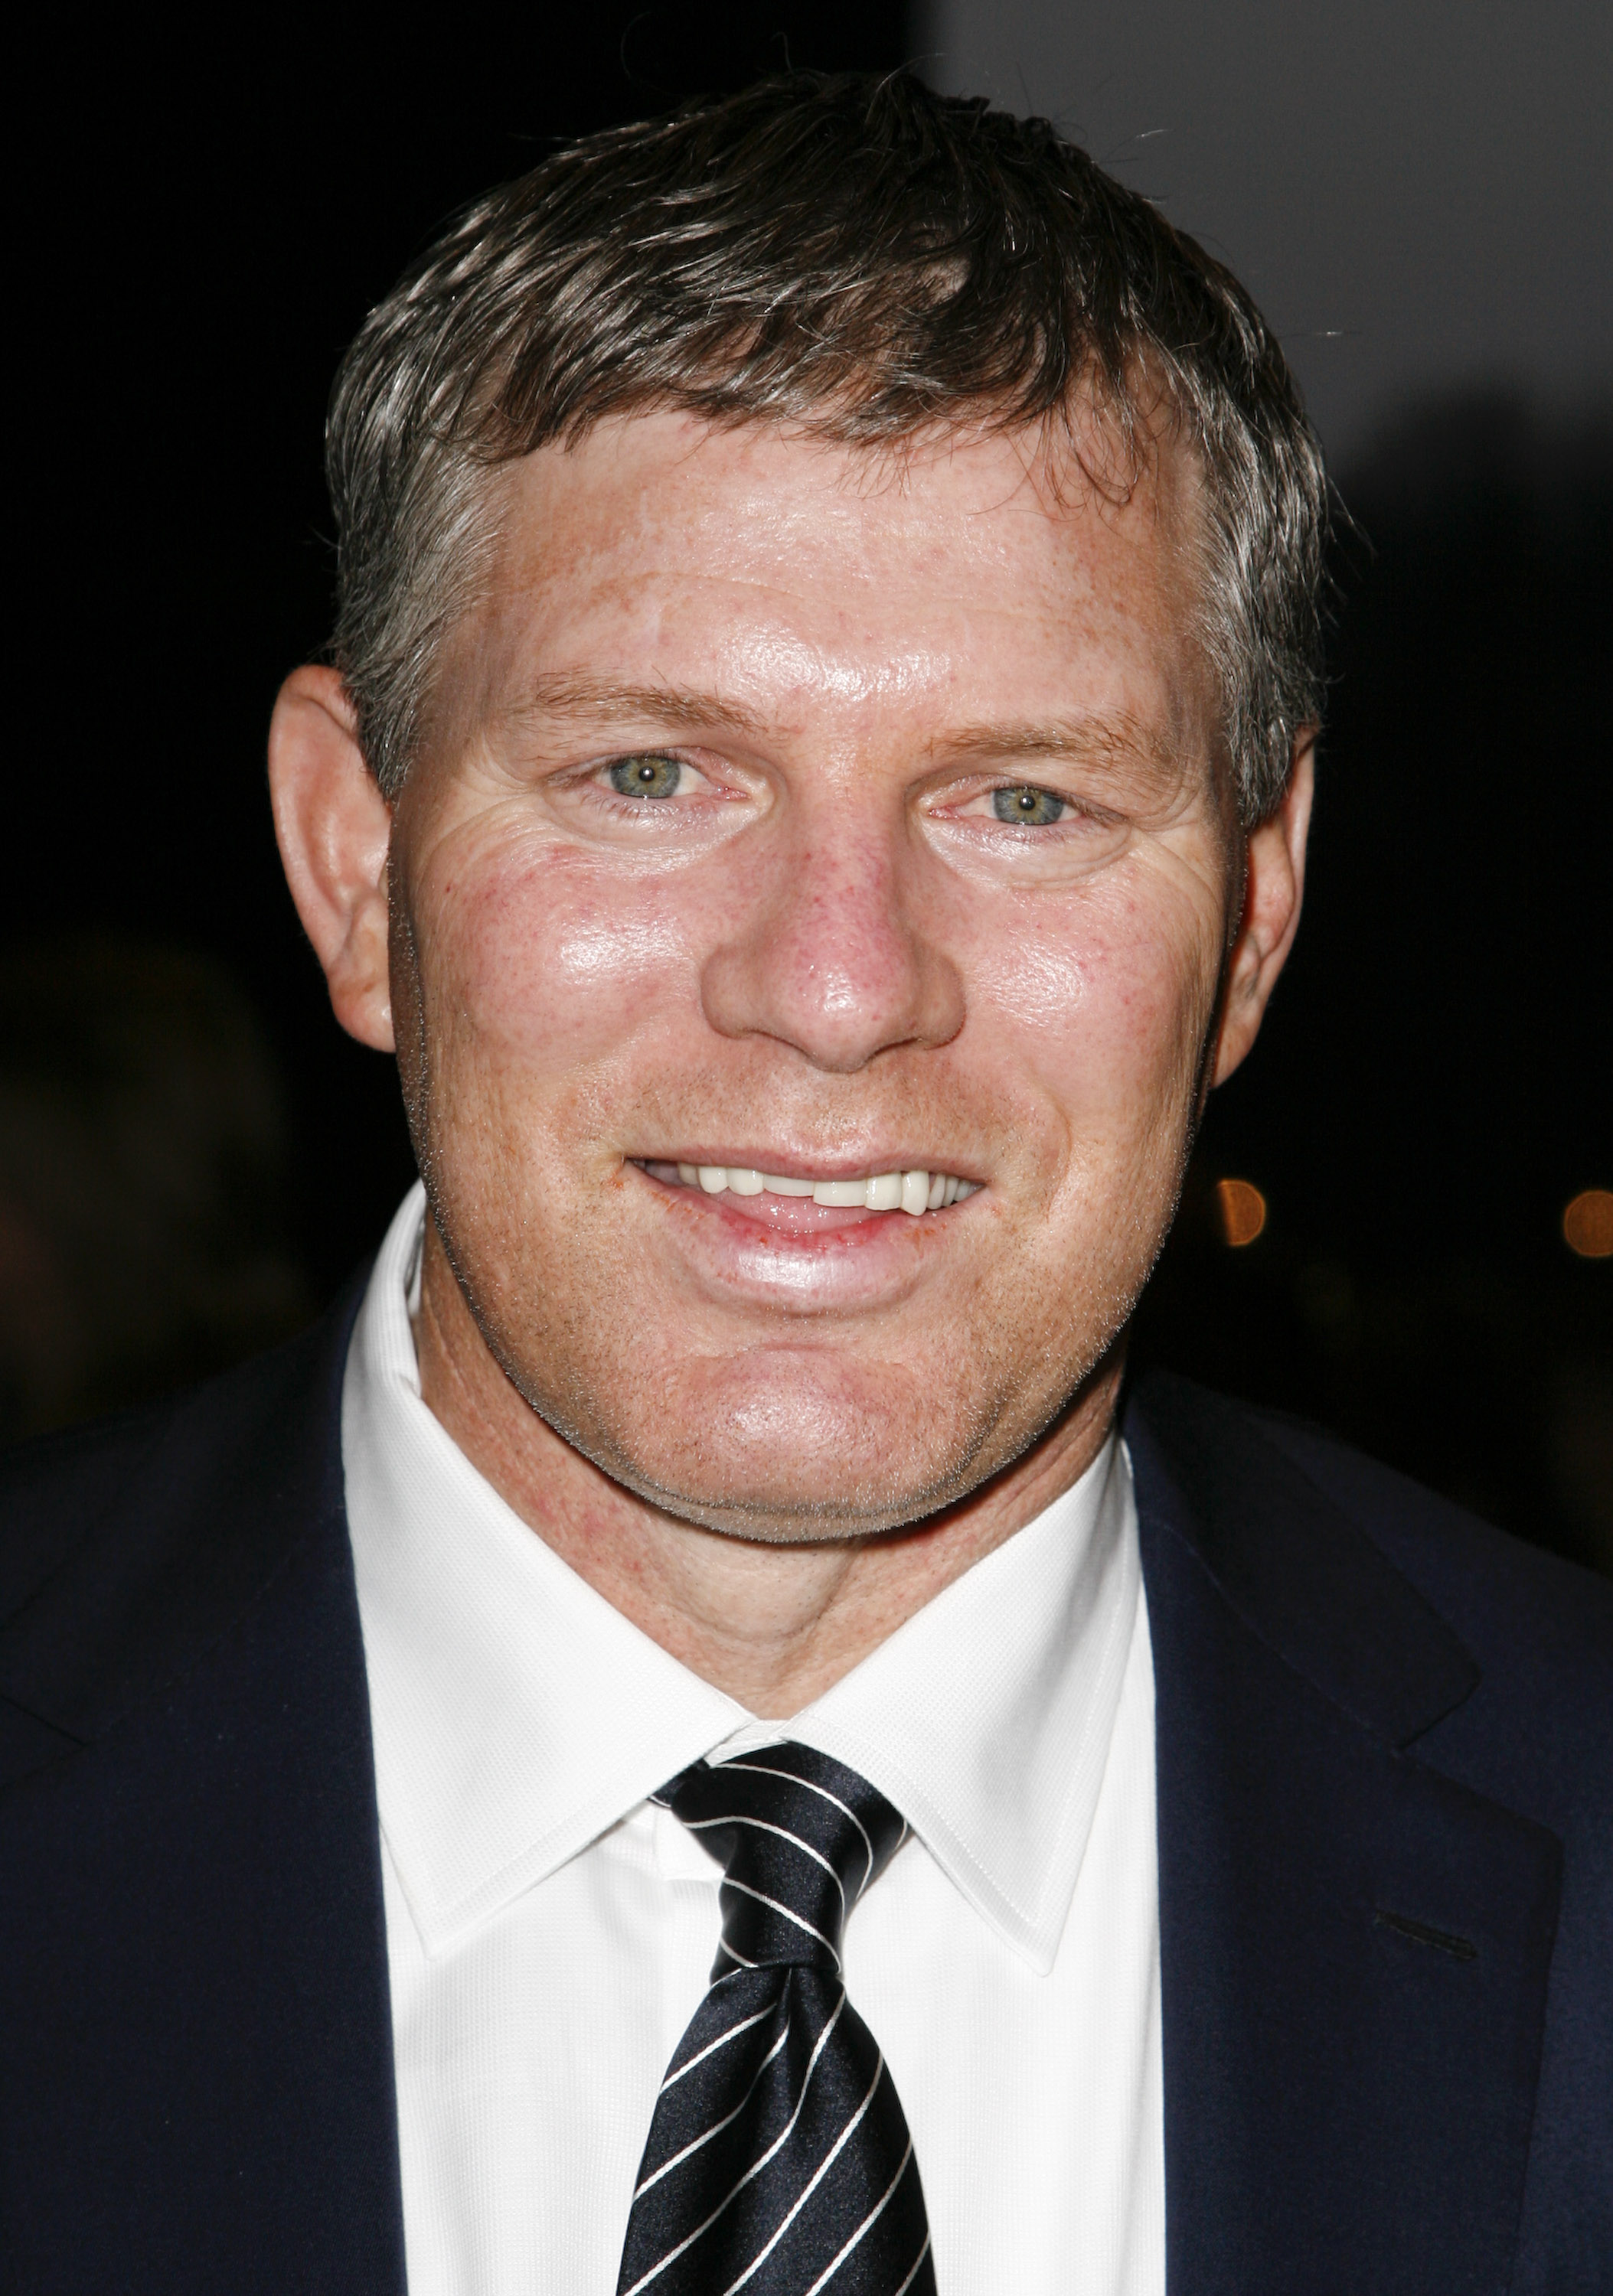 Lenny Dykstra's bizarre, troubled timeline: From baseball all-star to N.J.  flophouse owner 